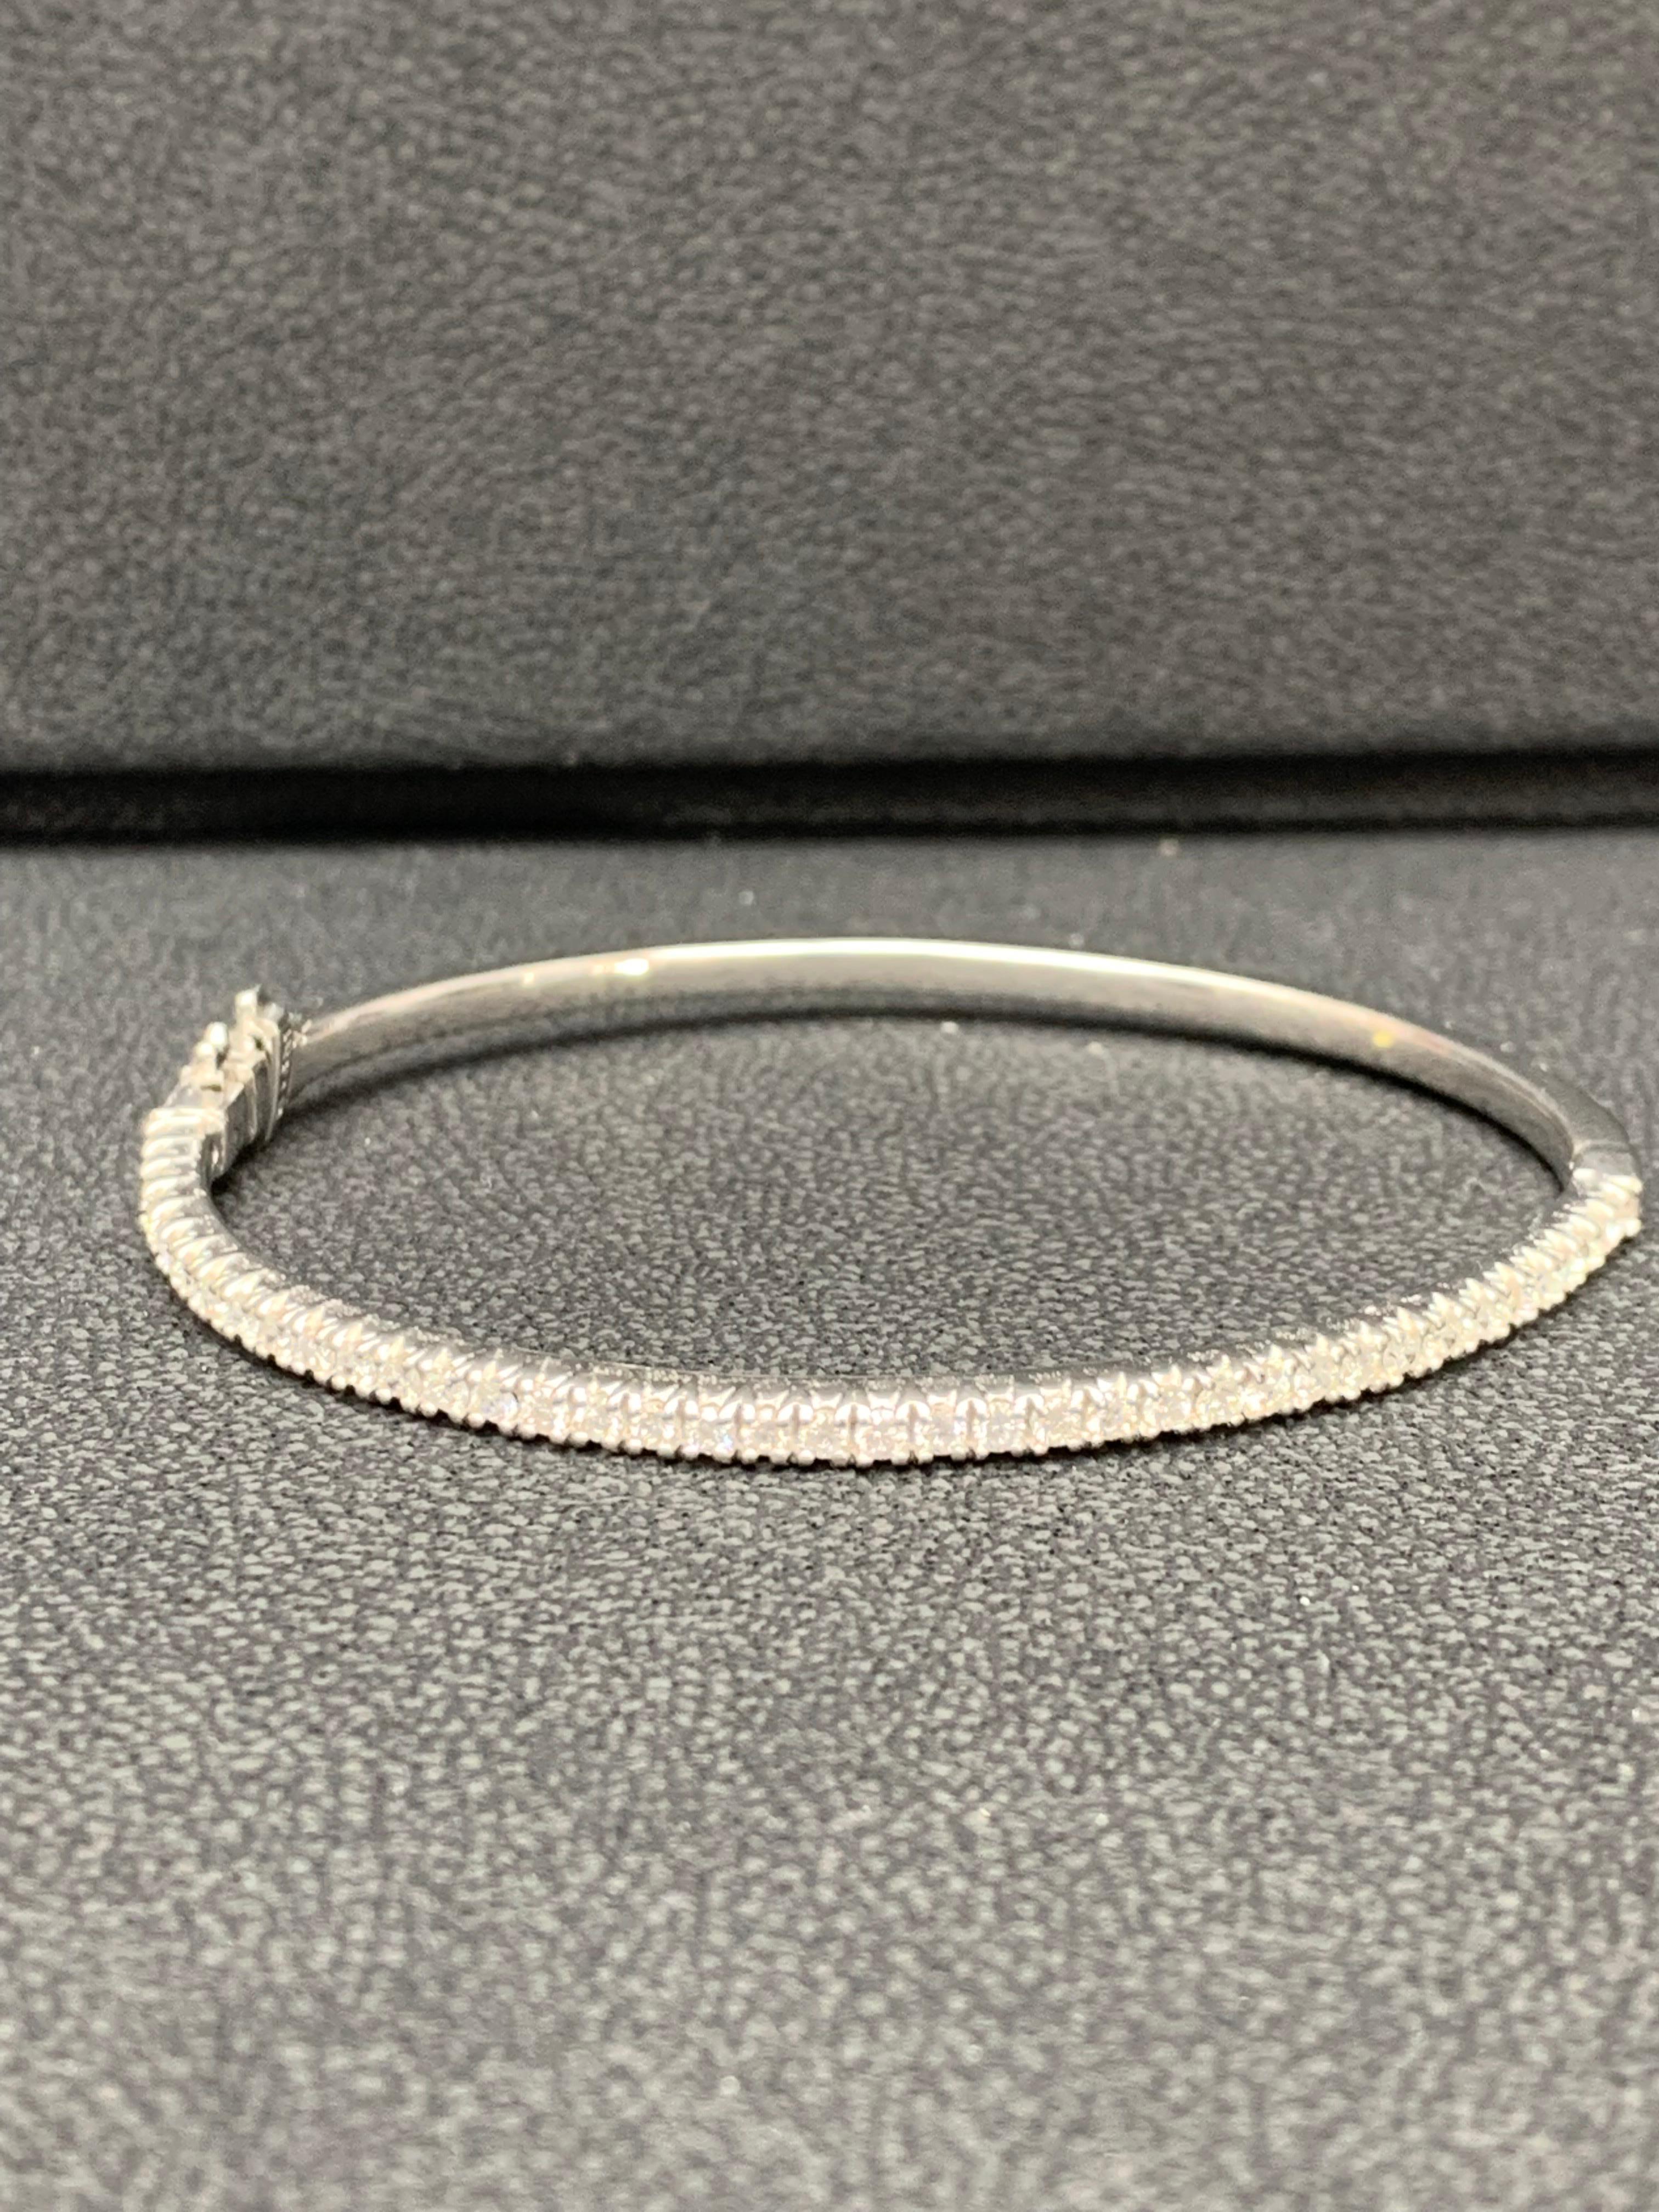 A simple but elegant bangle bracelet set with 40 round cut diamonds weighing 1.00 carats total. Has a clasp to slip and wear the bangle securely. Made in 14k white gold.

Style available in different price ranges. Prices are based on your selection